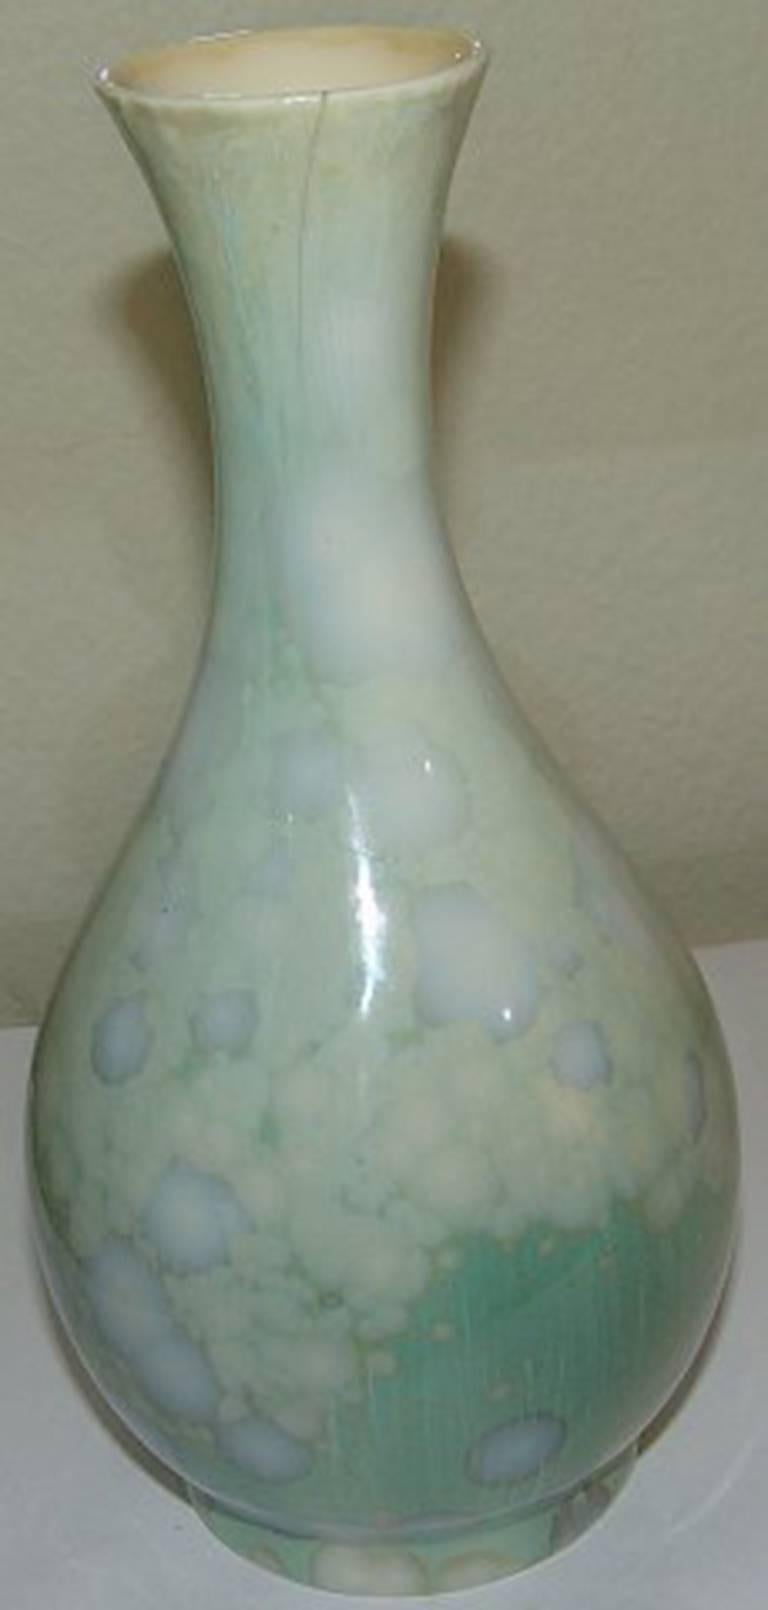 Royal Copenhagen crystalline glaze vase by Paul Prochowsky, 21-12-1922. Measures 21.3 cm and has a hairline, see picture.